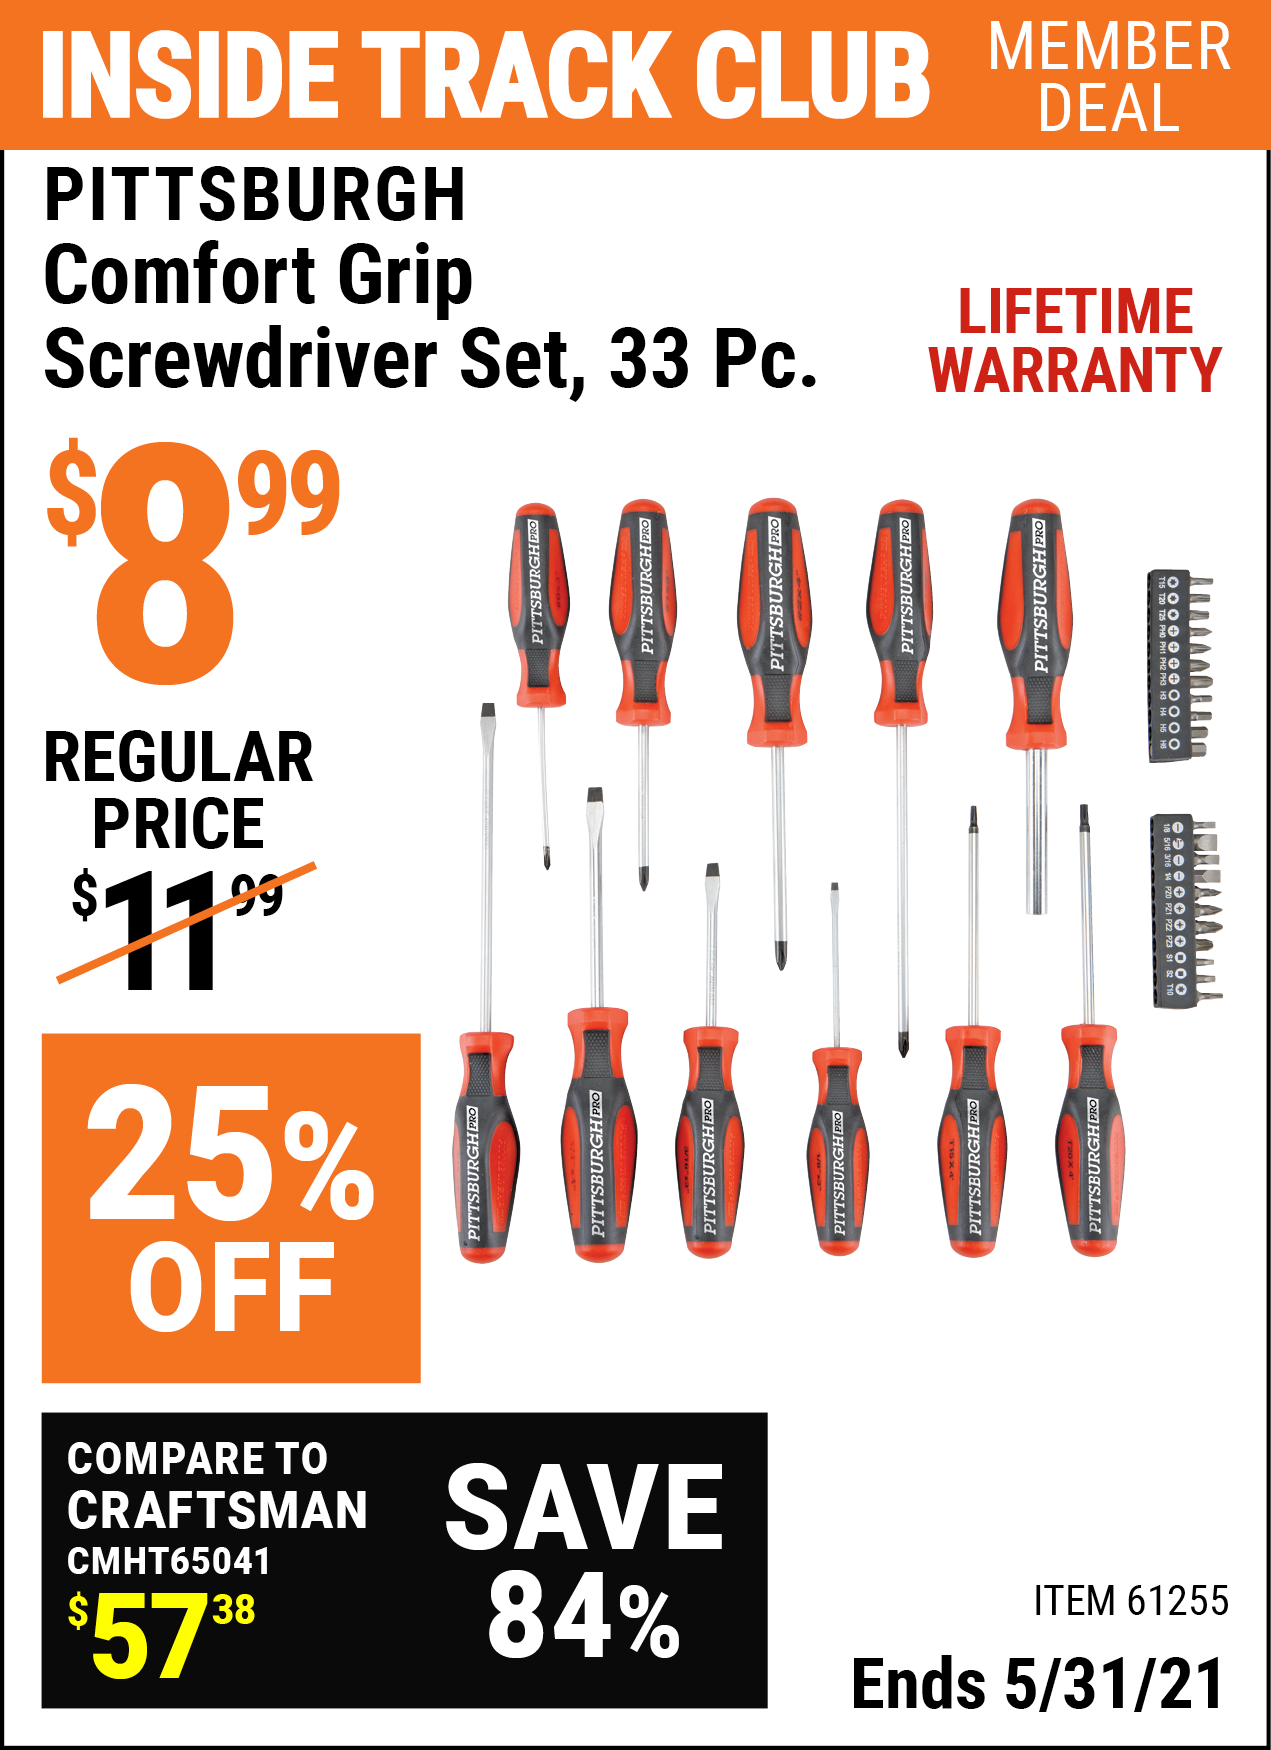 Inside Track Club members can buy the PITTSBURGH Comfort Grip Screwdriver Set 33 Pc. (Item 61255) for $8.99, valid through 5/31/2021.